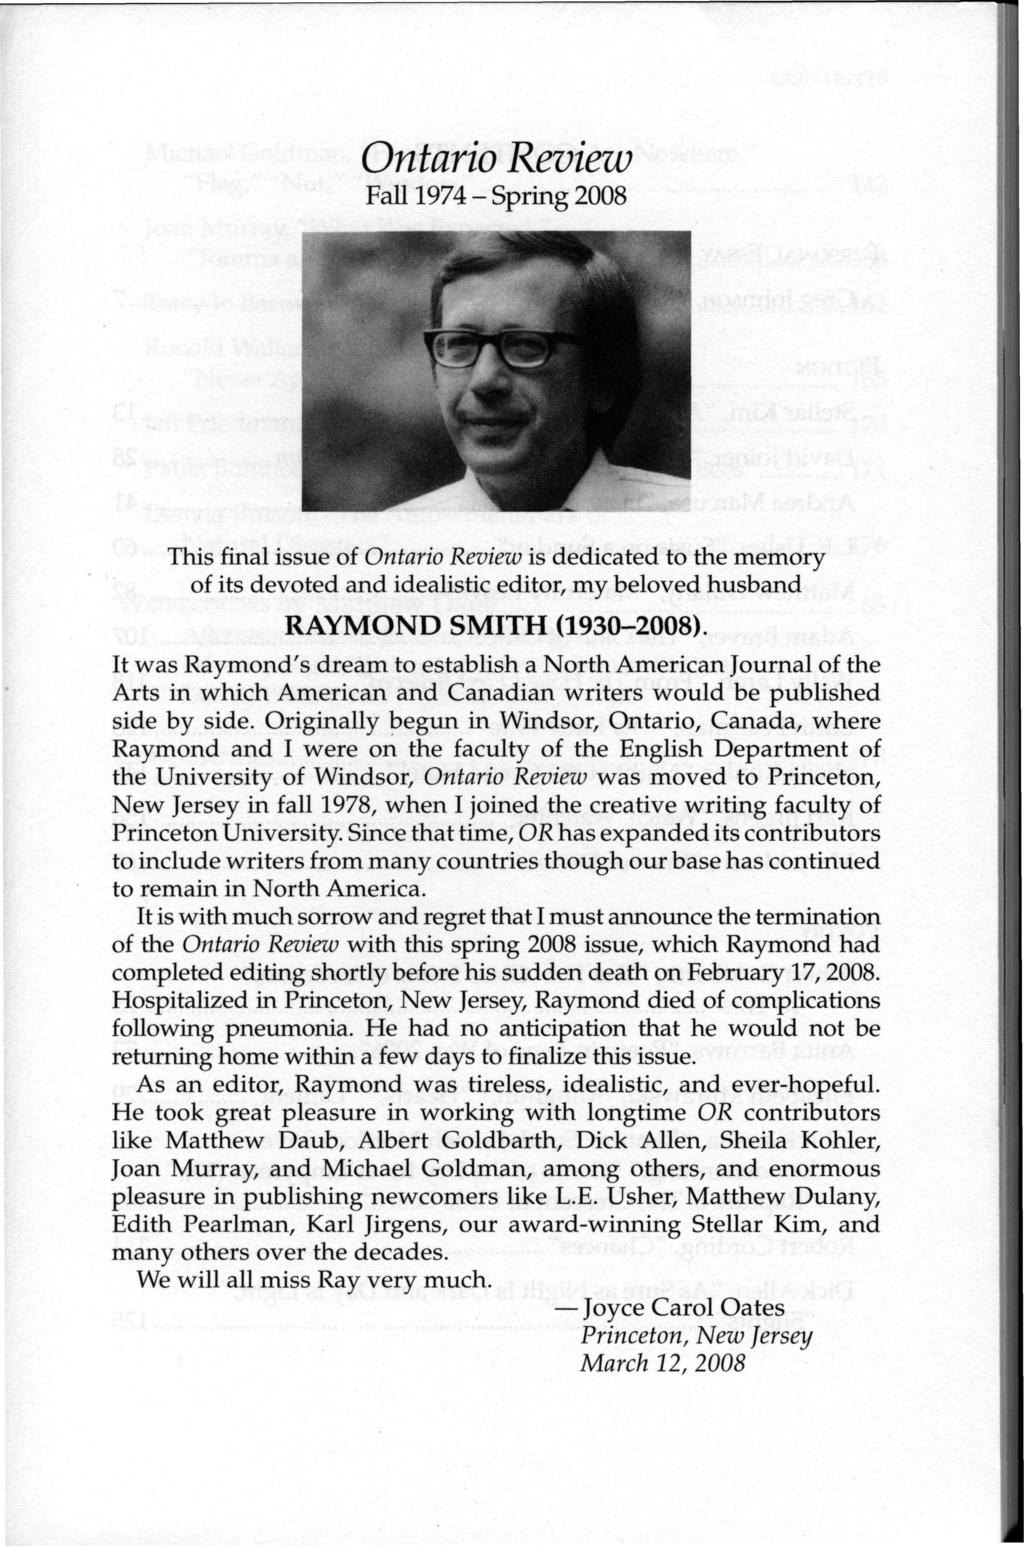 Ontario Review Fall 1 9 7 4 - S p r i n g 2008 This final issue of Ontario Review is dedicated to the memory of its devoted and idealistic editor, my beloved husband R A Y M O N D S M I T H